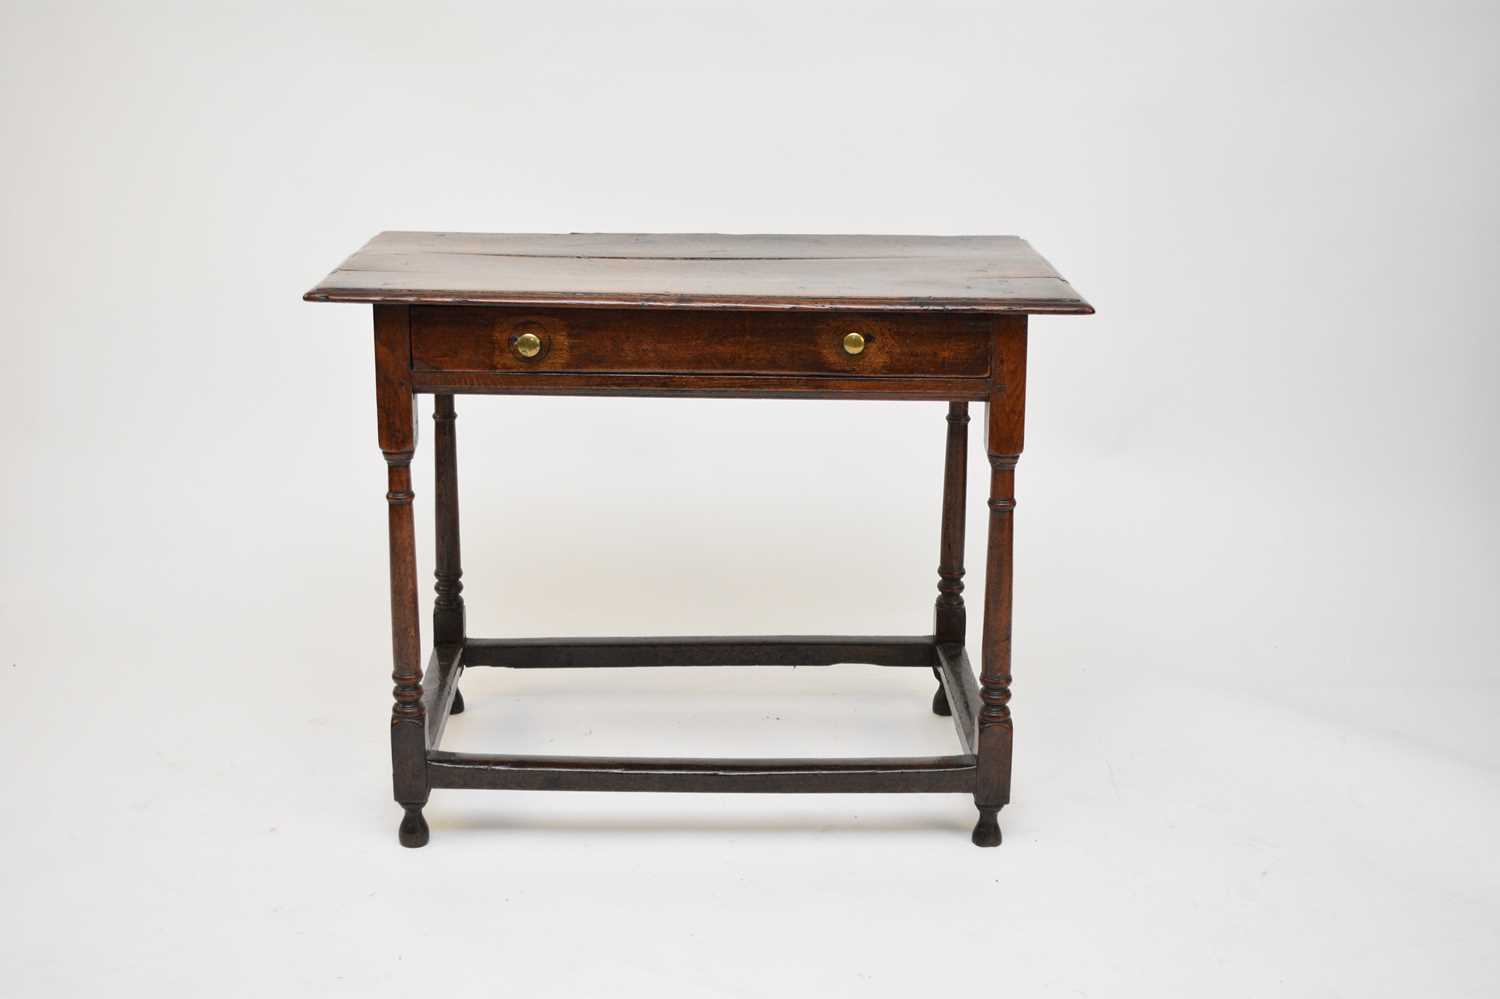 A late 17th century/early 18th century oak side table